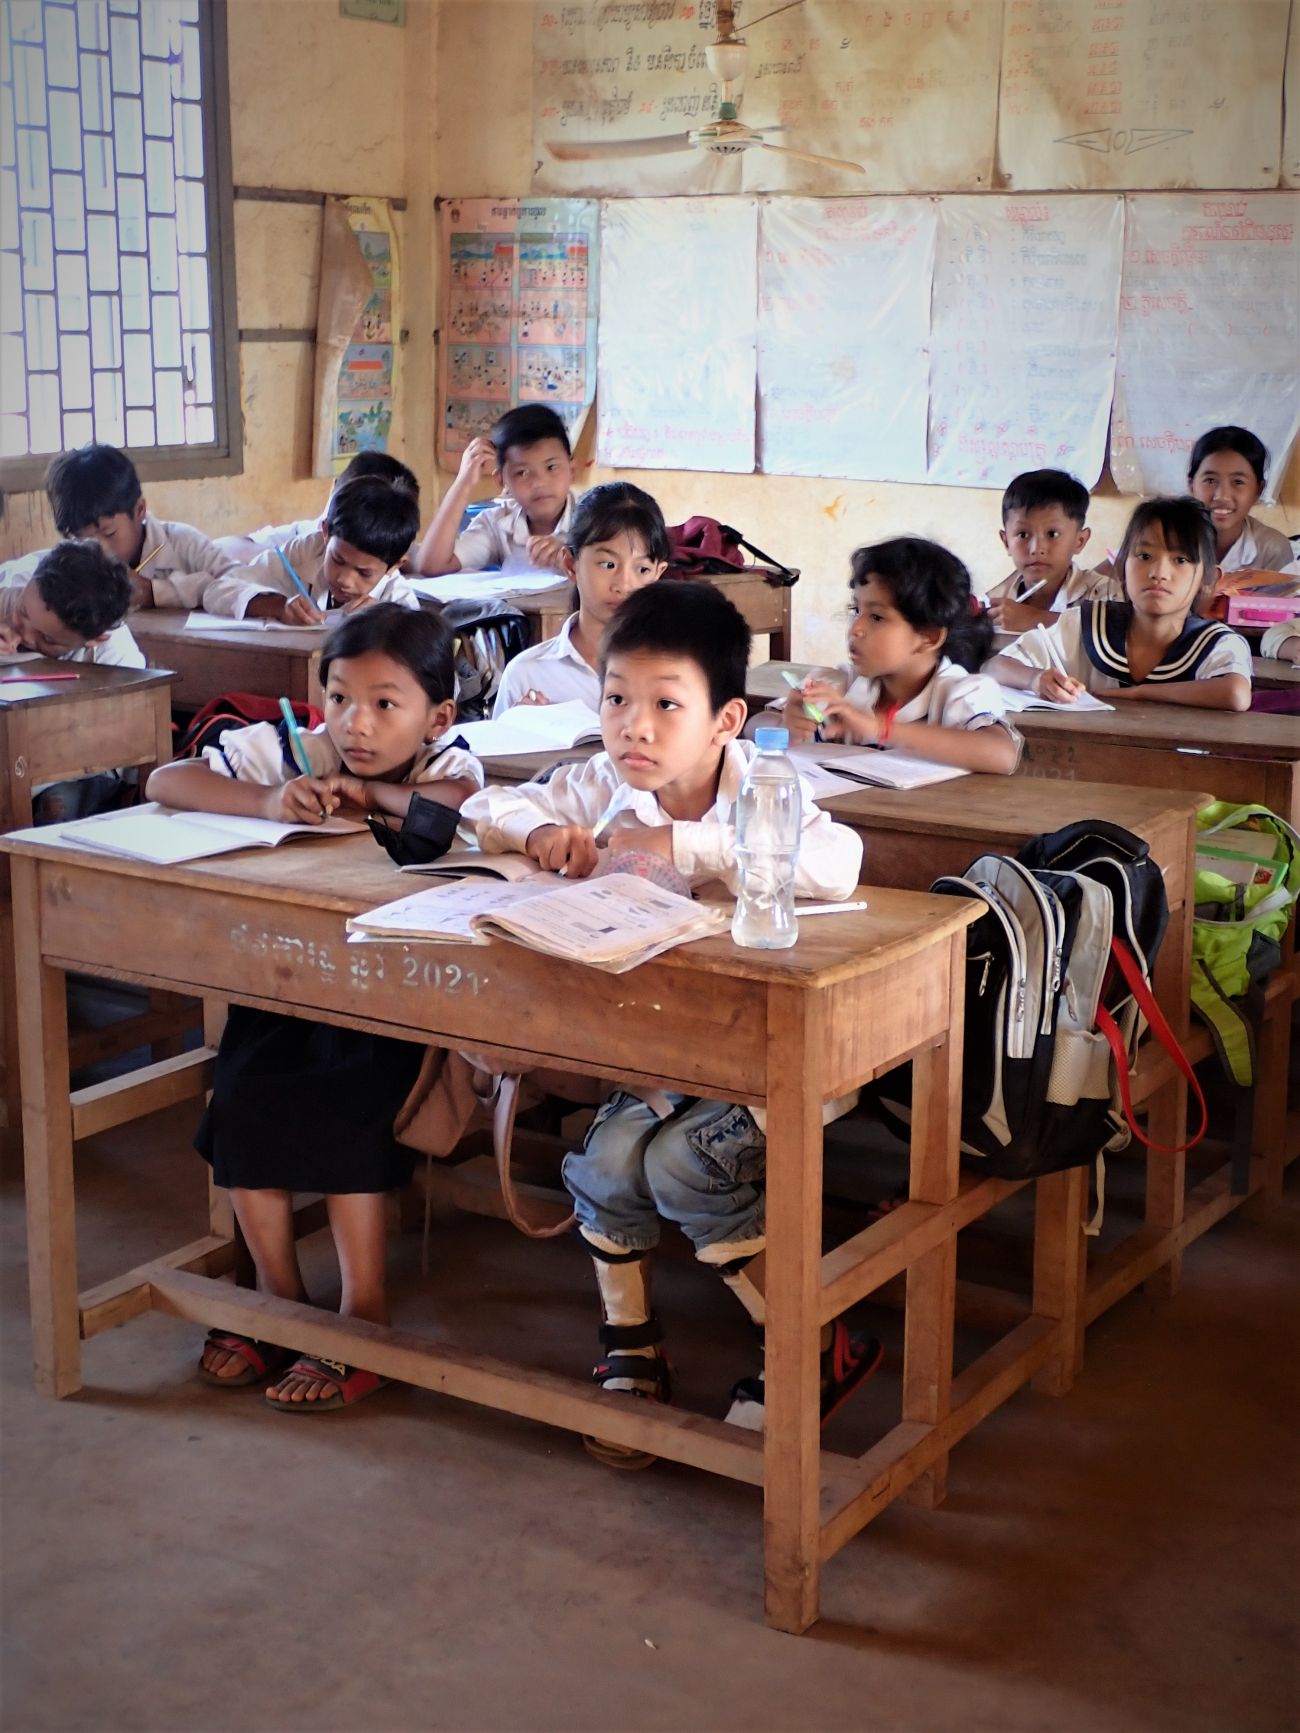 Kham Chanreaksa can attend class thanks to the orthoses supplied by HI. He is in the front row writing in his notebook. 